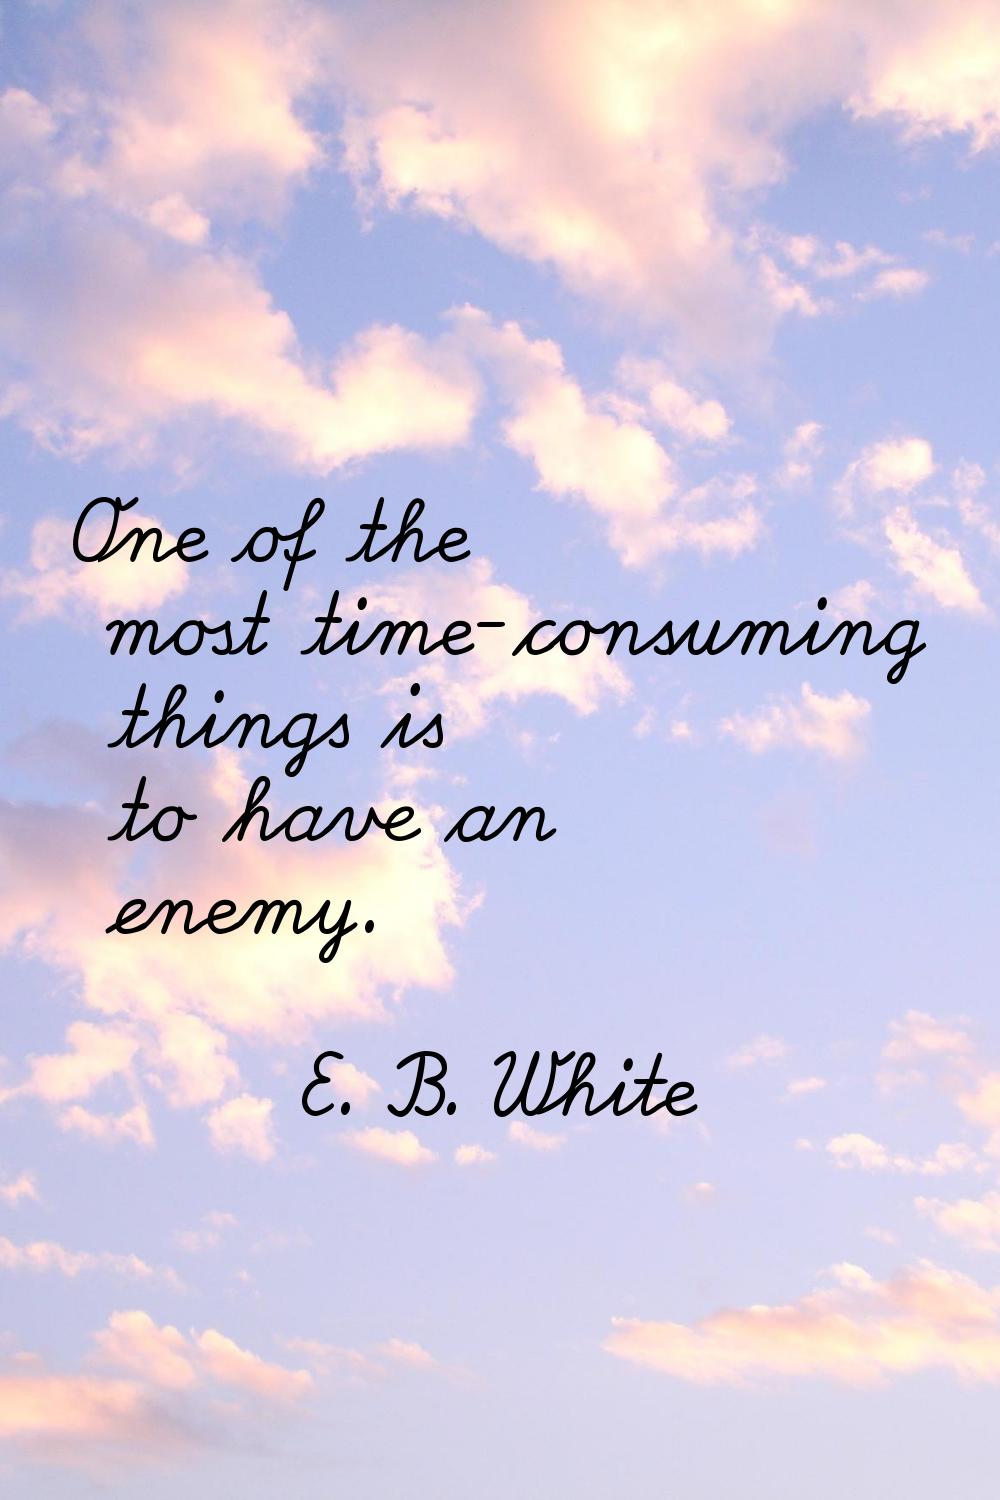 One of the most time-consuming things is to have an enemy.